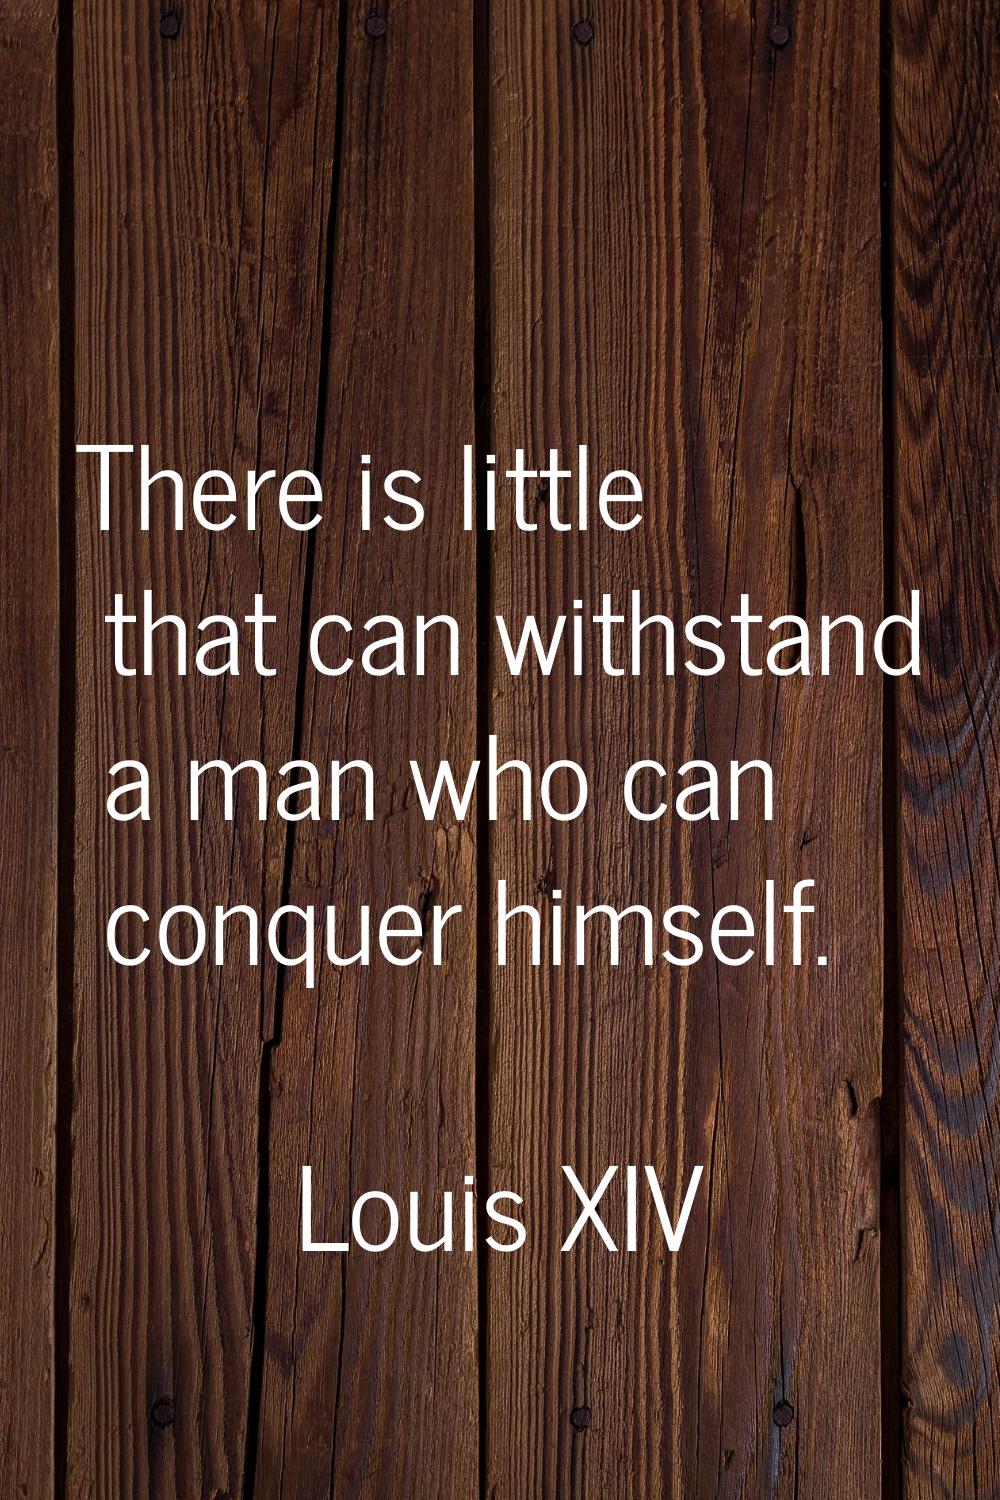 There is little that can withstand a man who can conquer himself.